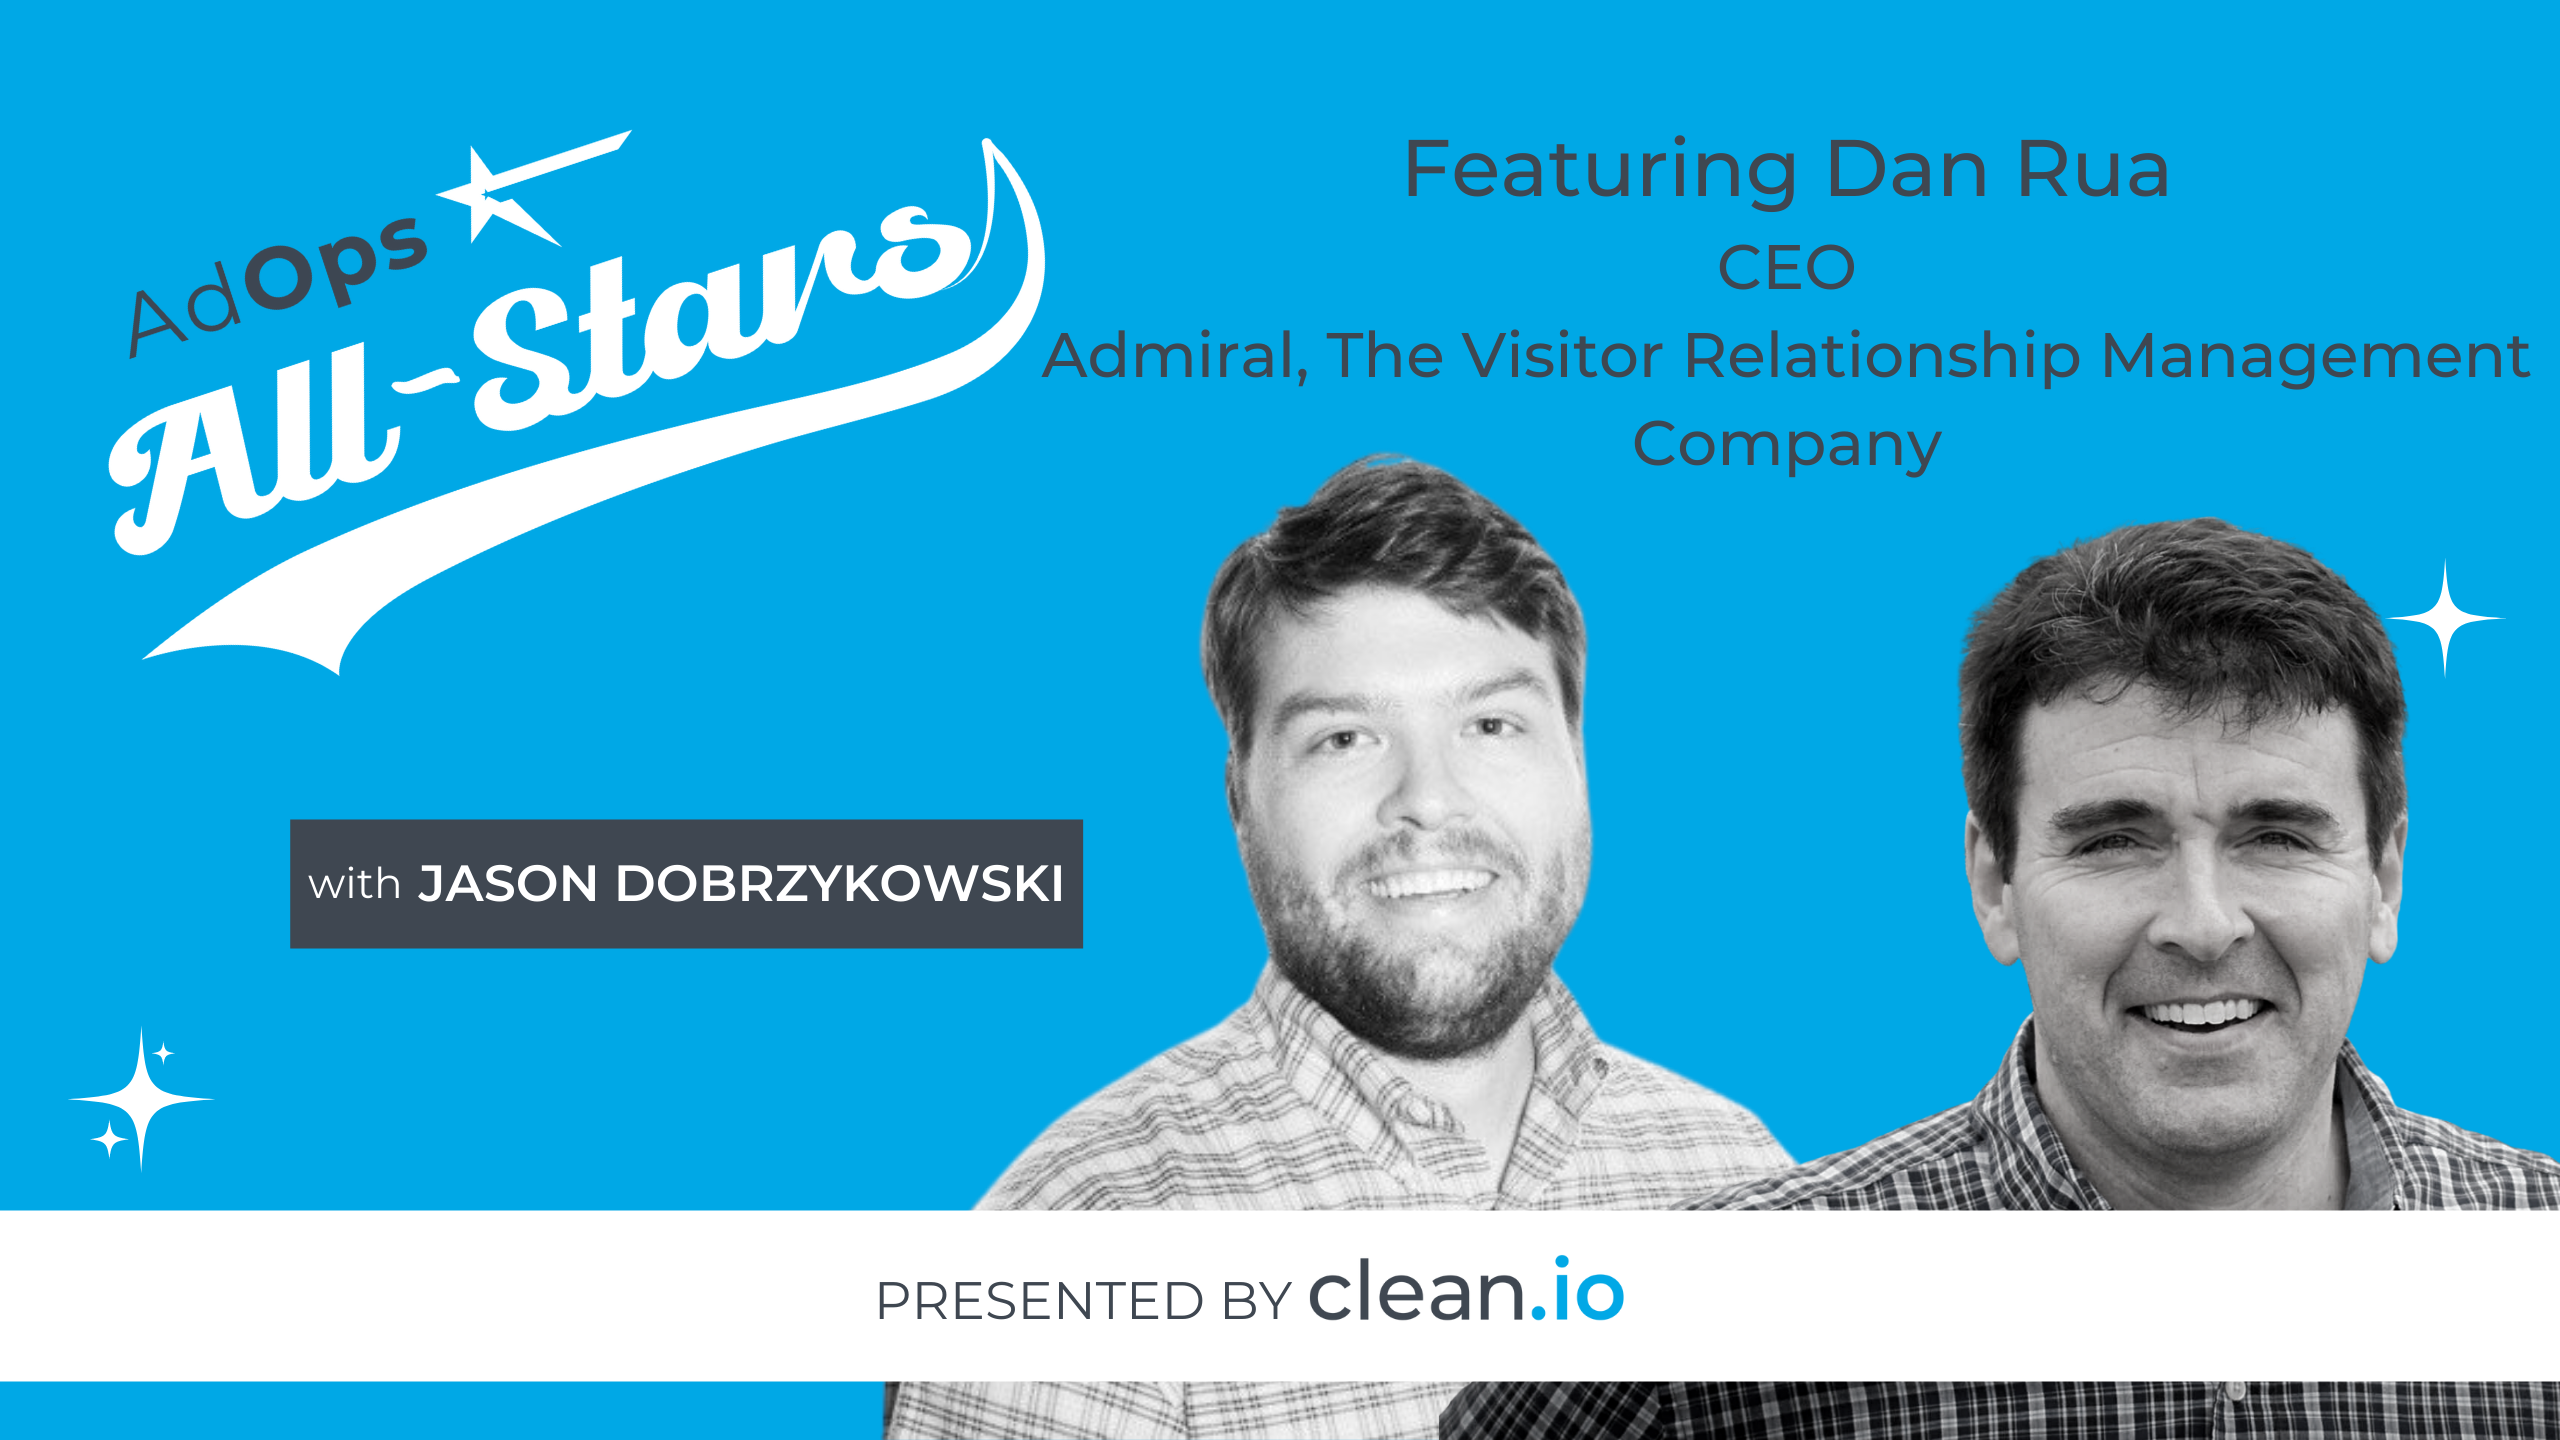 Ad Ops All Stars: Dan Rua, CEO of Admiral, The Visitor Relationship Management Company